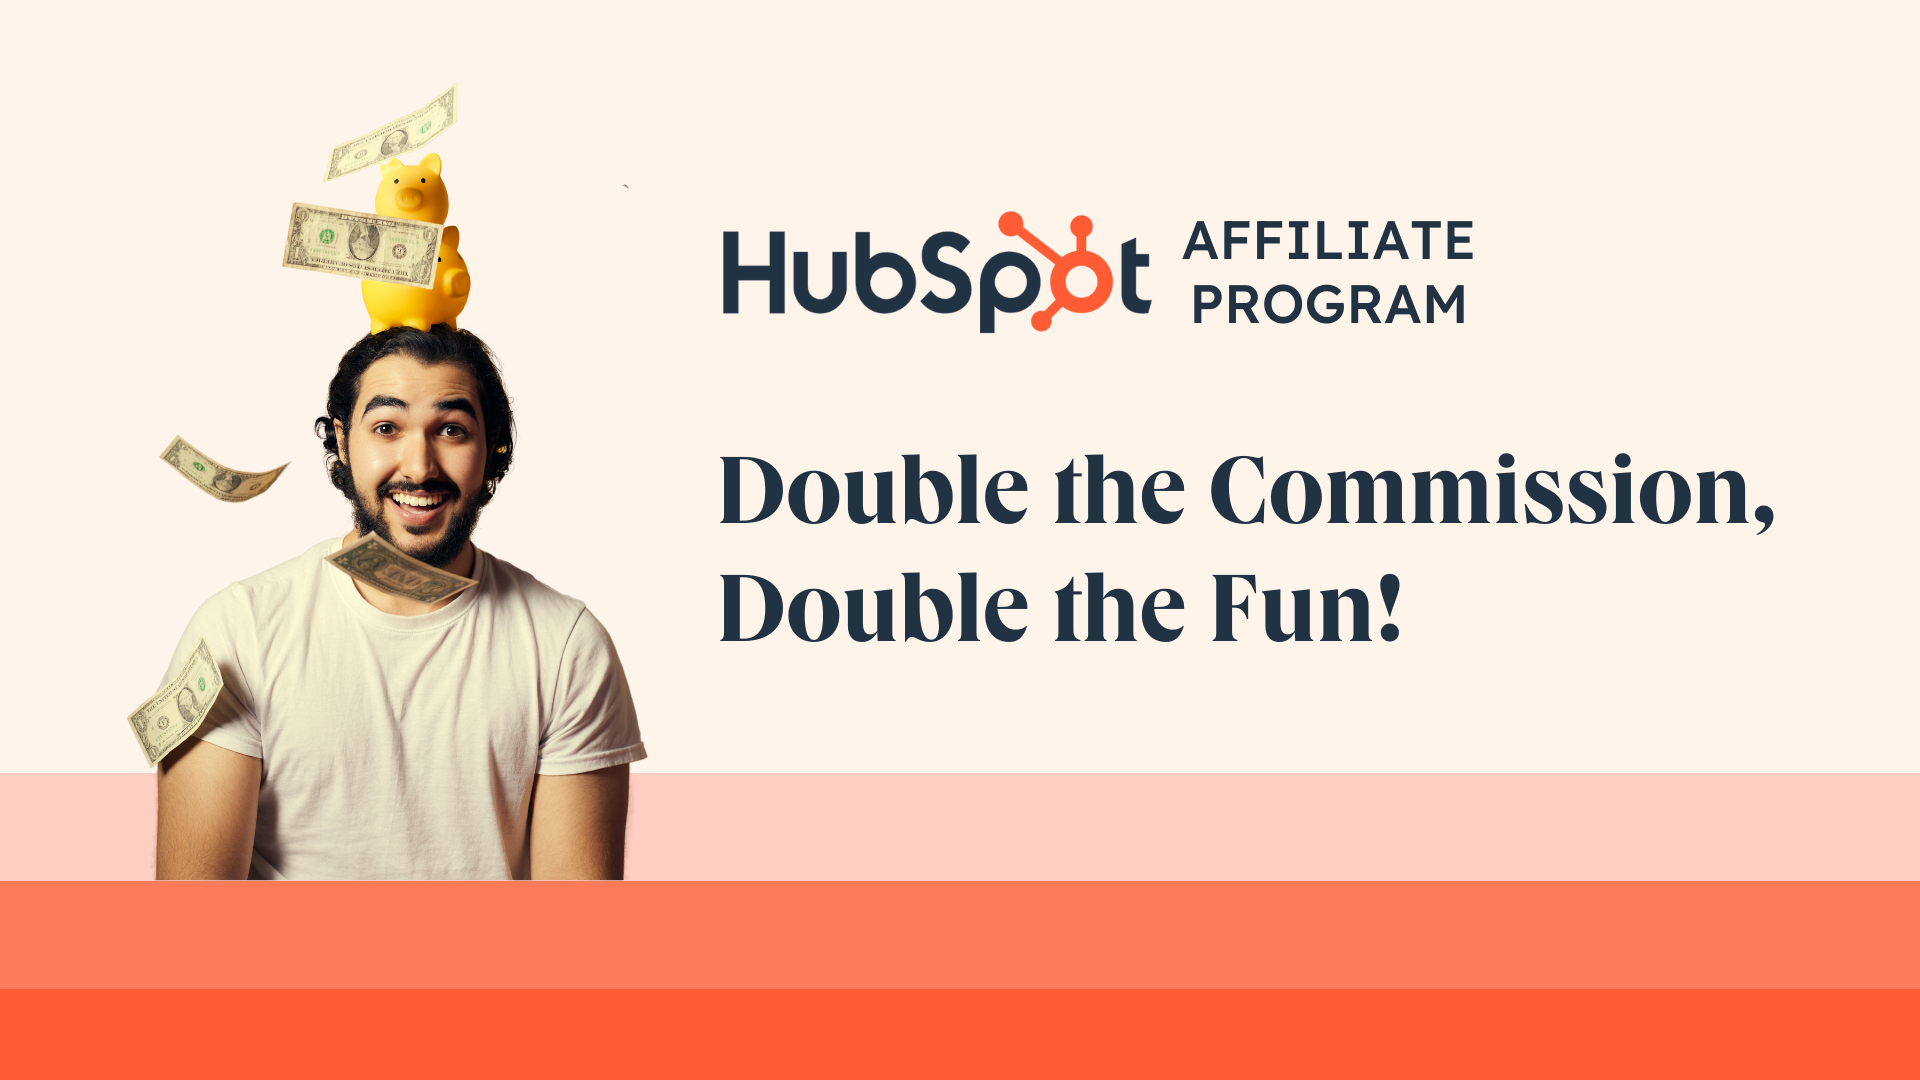 HubSpot Launches Its Revamped Affiliate Program